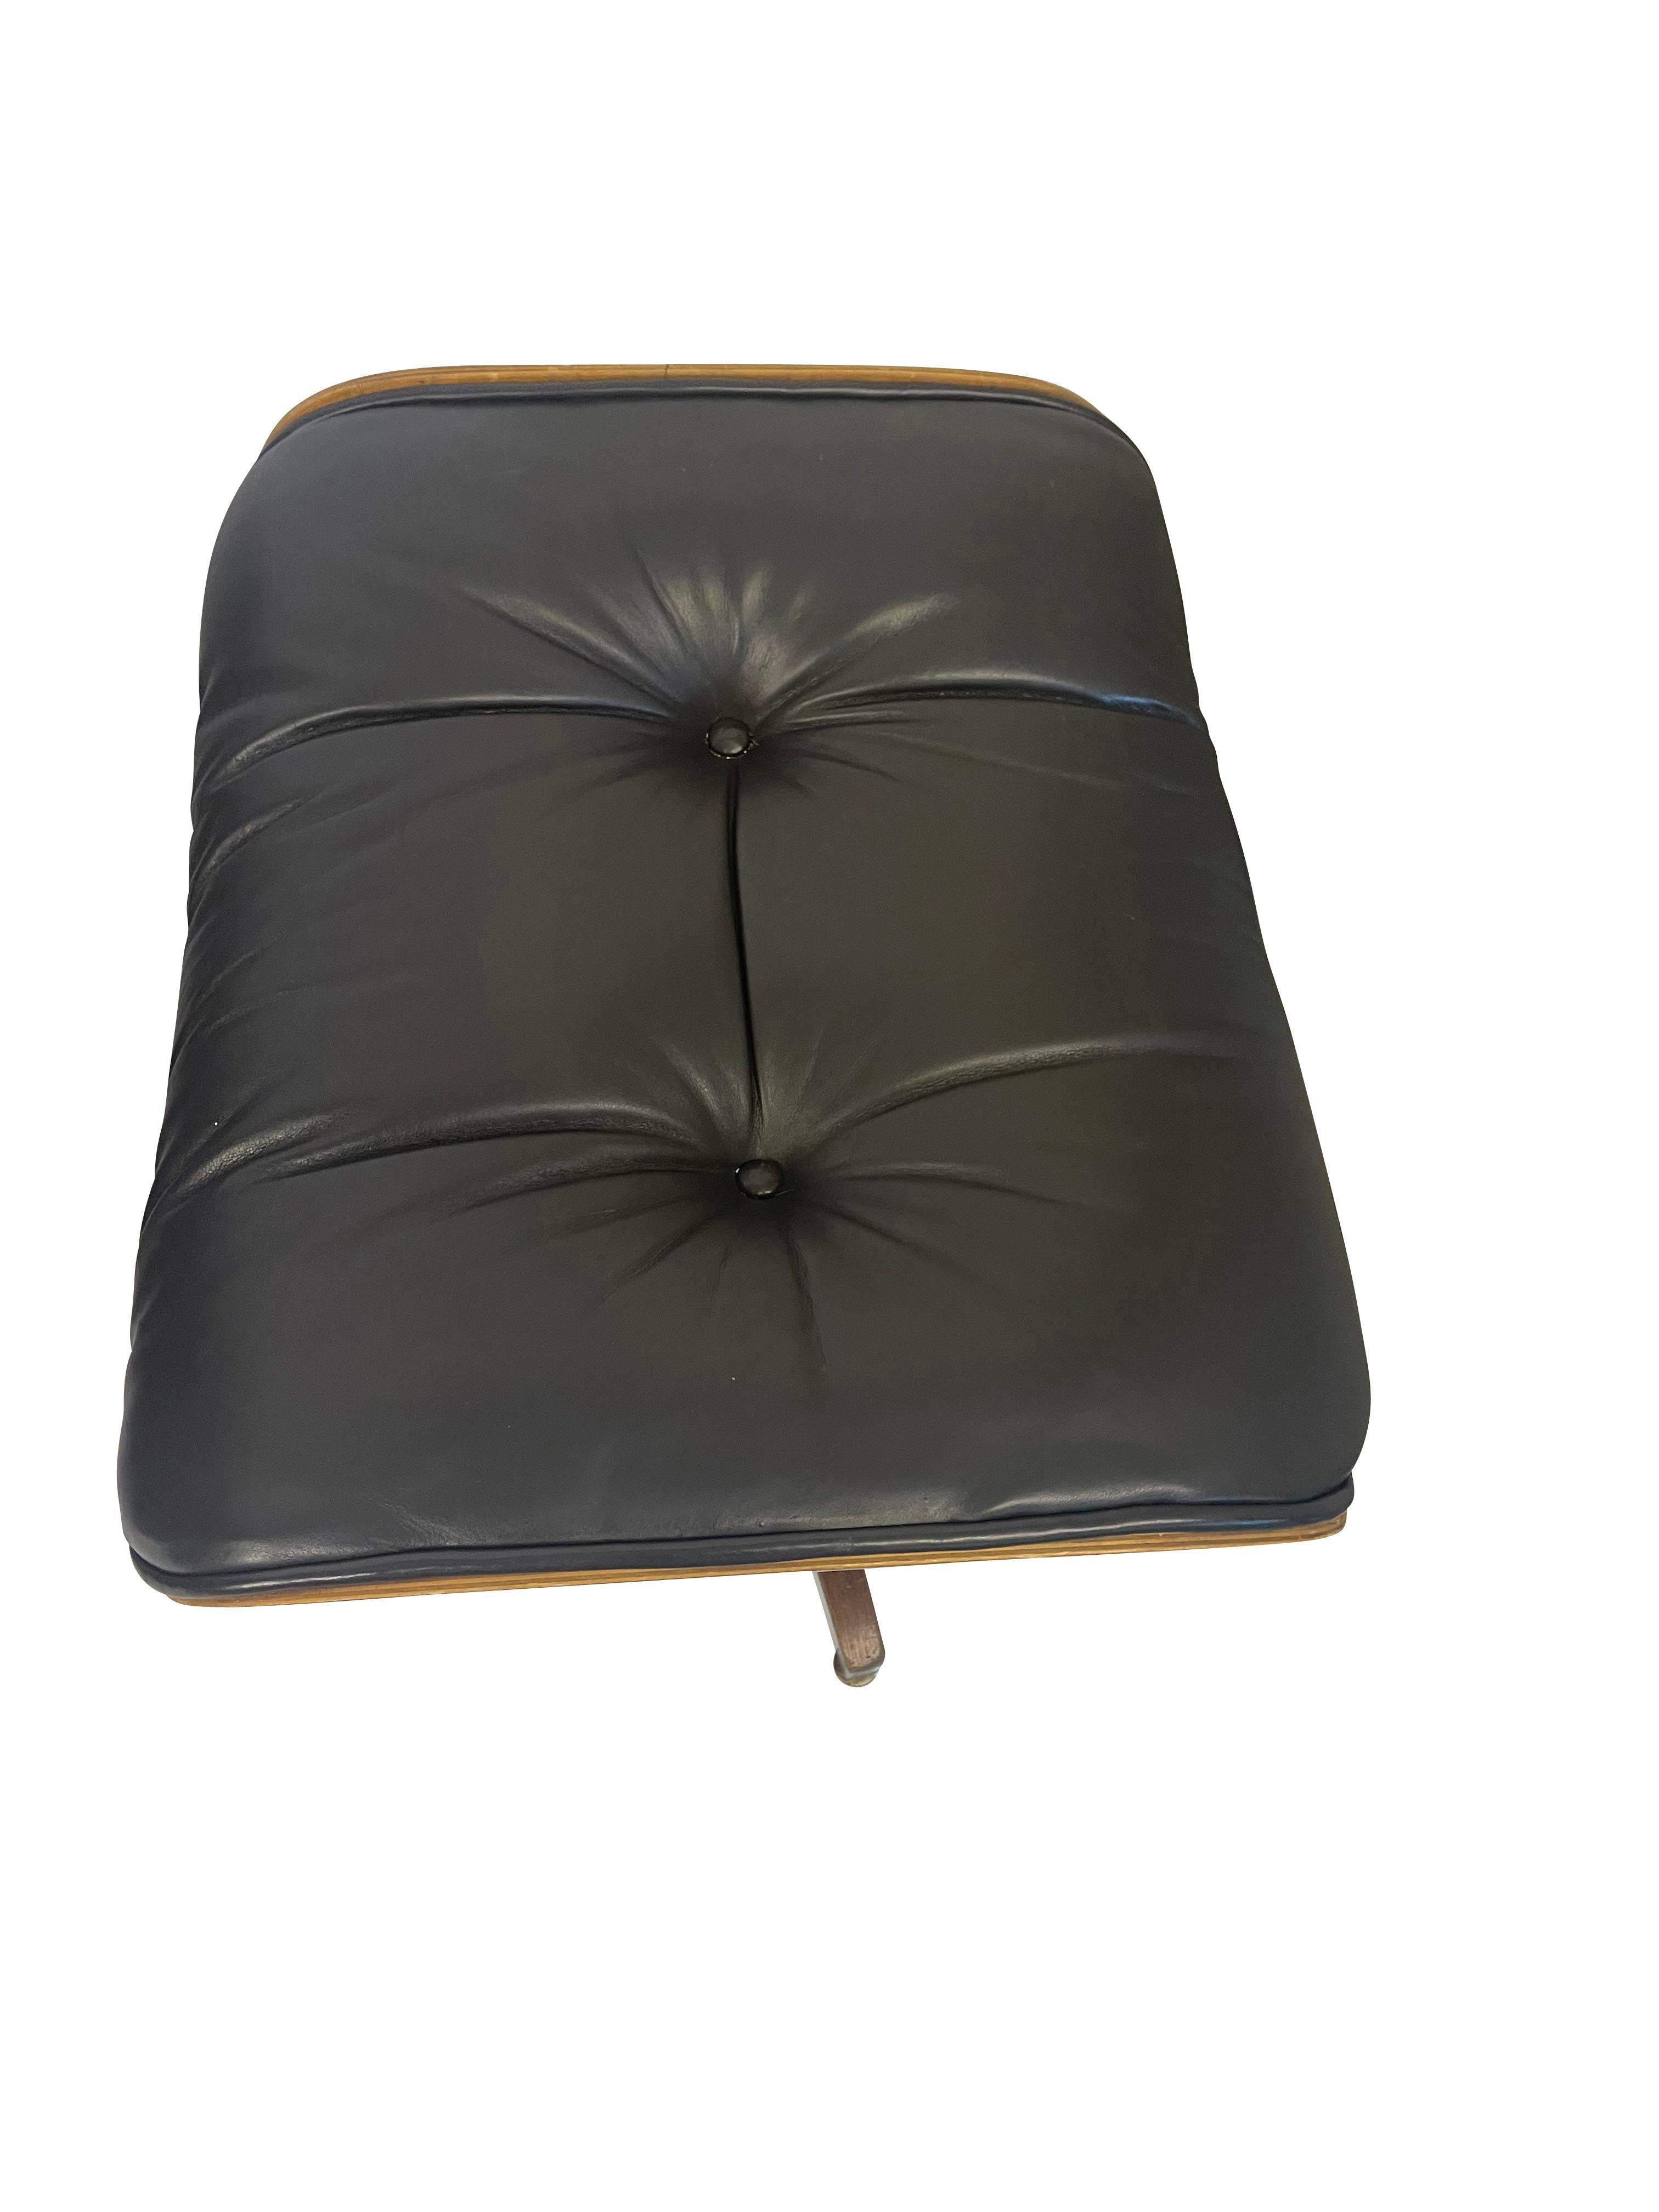 George Mulhauser Designed Plycraft Walnut Black Leather Lounge Chair Ottoman  In Good Condition For Sale In Essex, MA